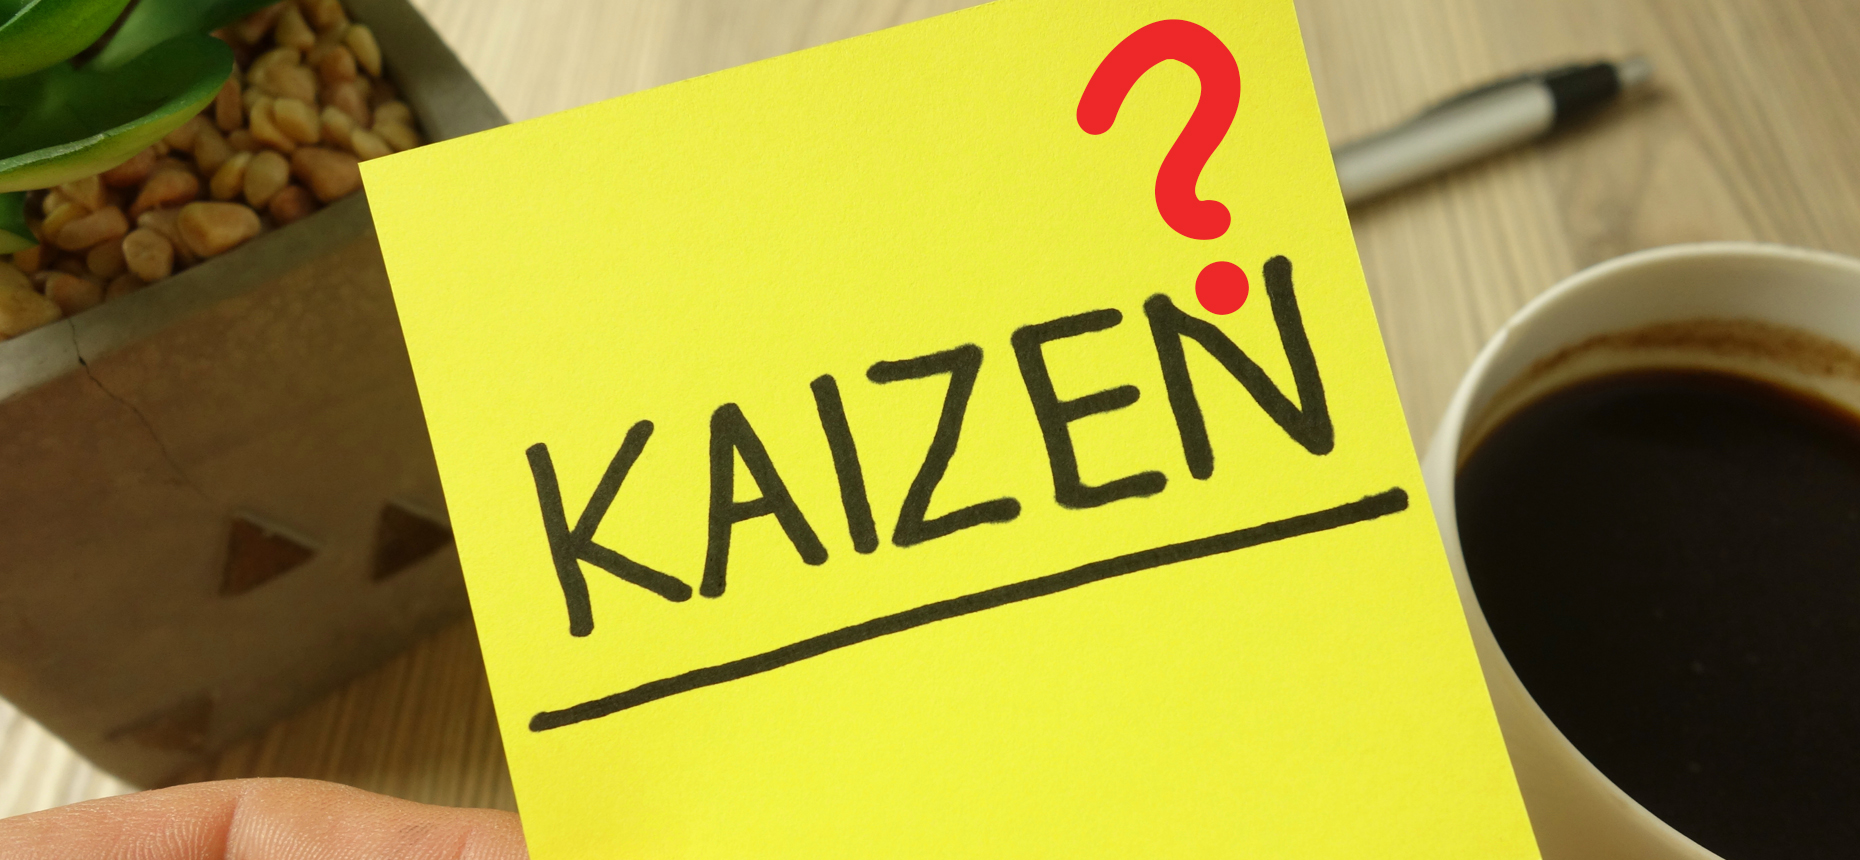 Kaizen on post it with question mark